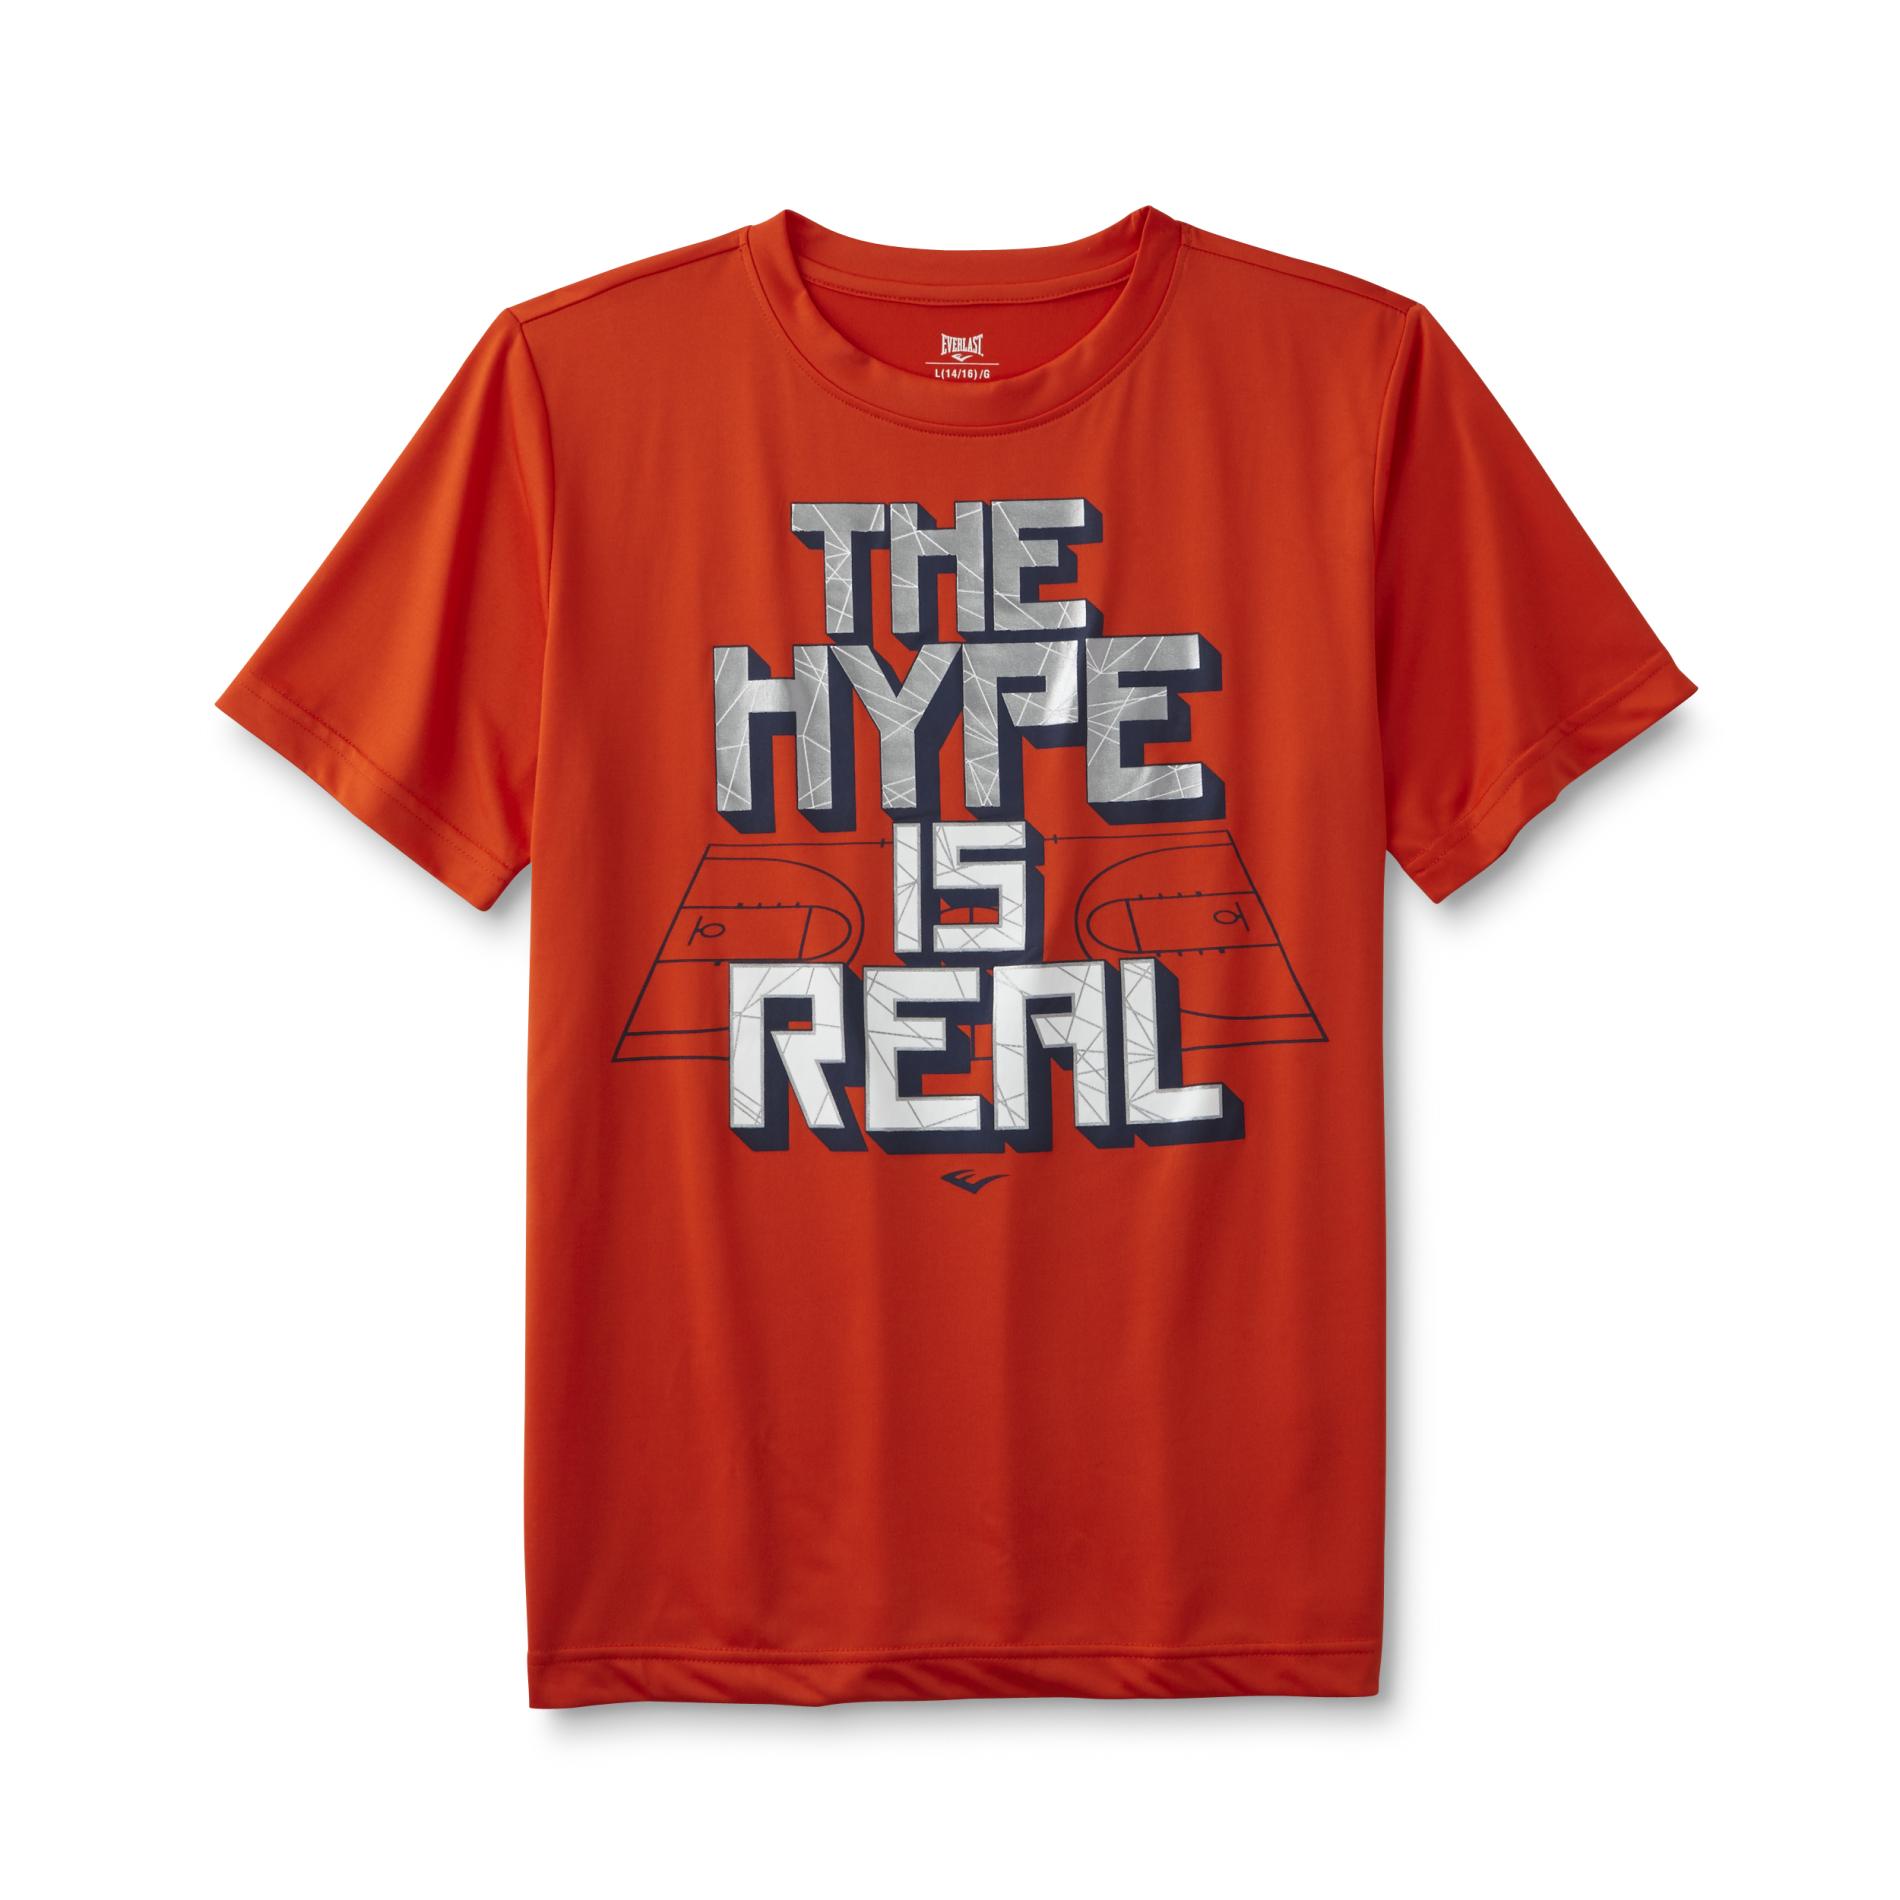 Everlast&reg; Boy's Graphic Athletic T-Shirt - The Hype Is Real